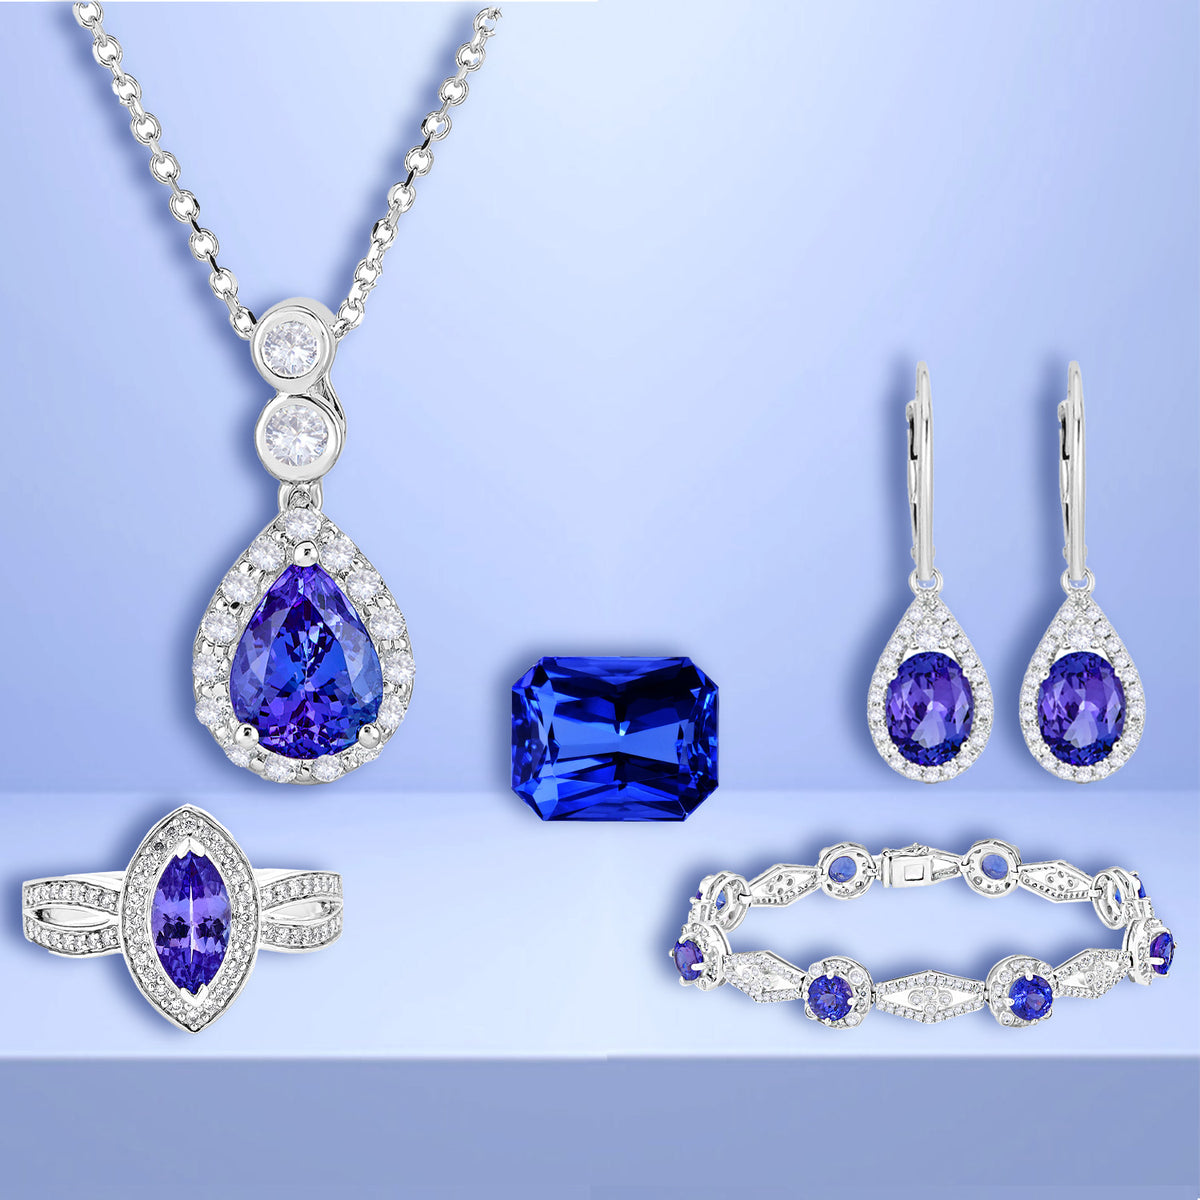 Tanzanite - It's Metaphysical properties and what they mean – Top Tanzanite